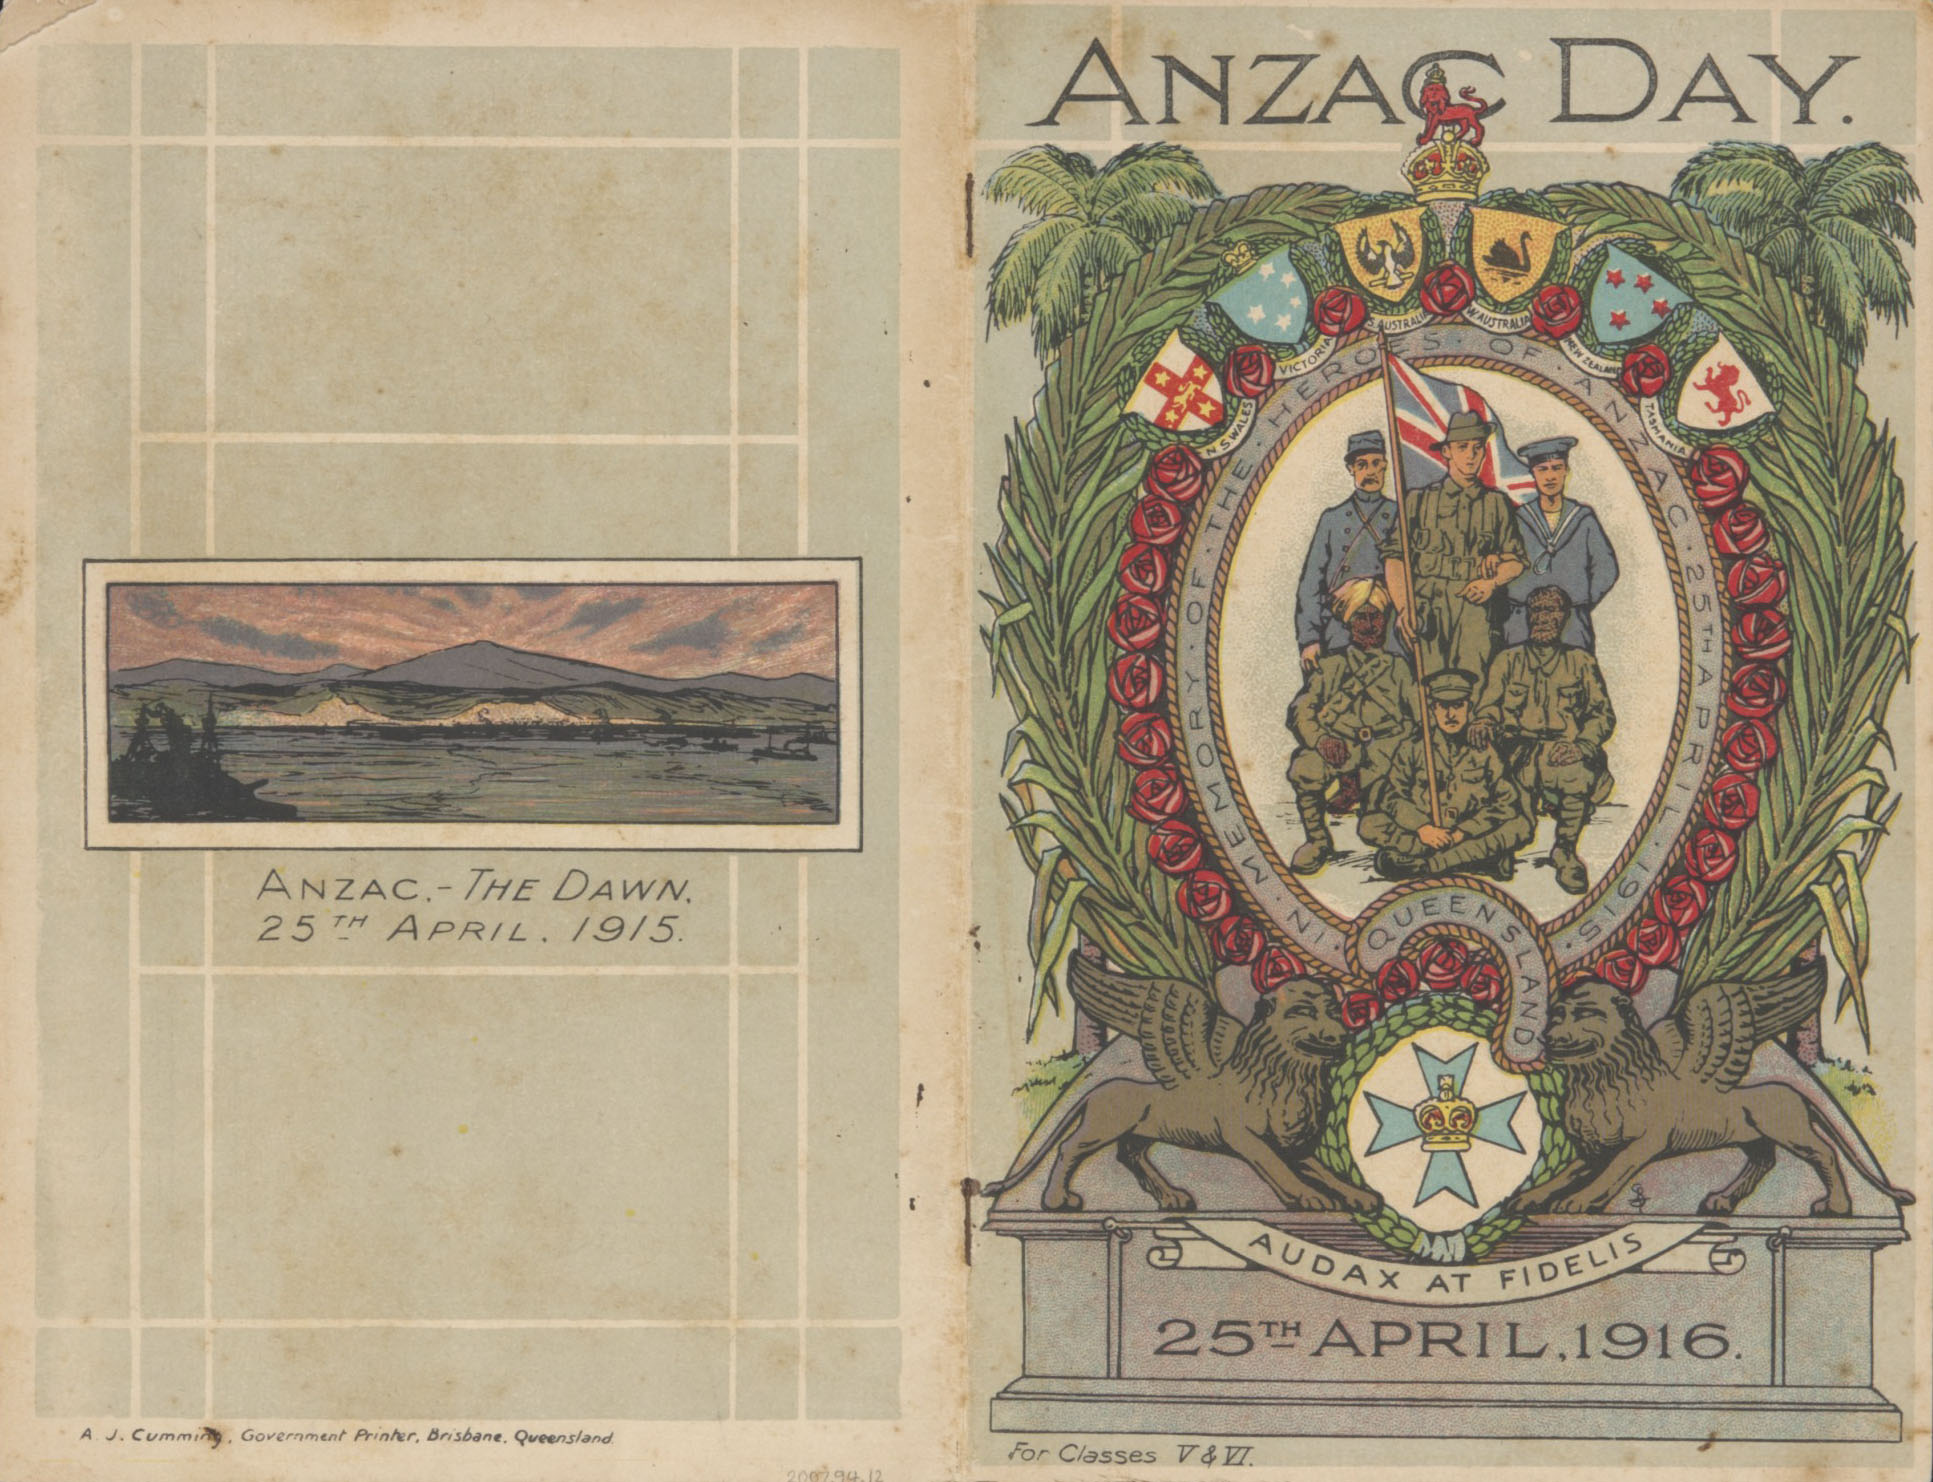 A soft cover booklet for the first Anzac Day, 1916.